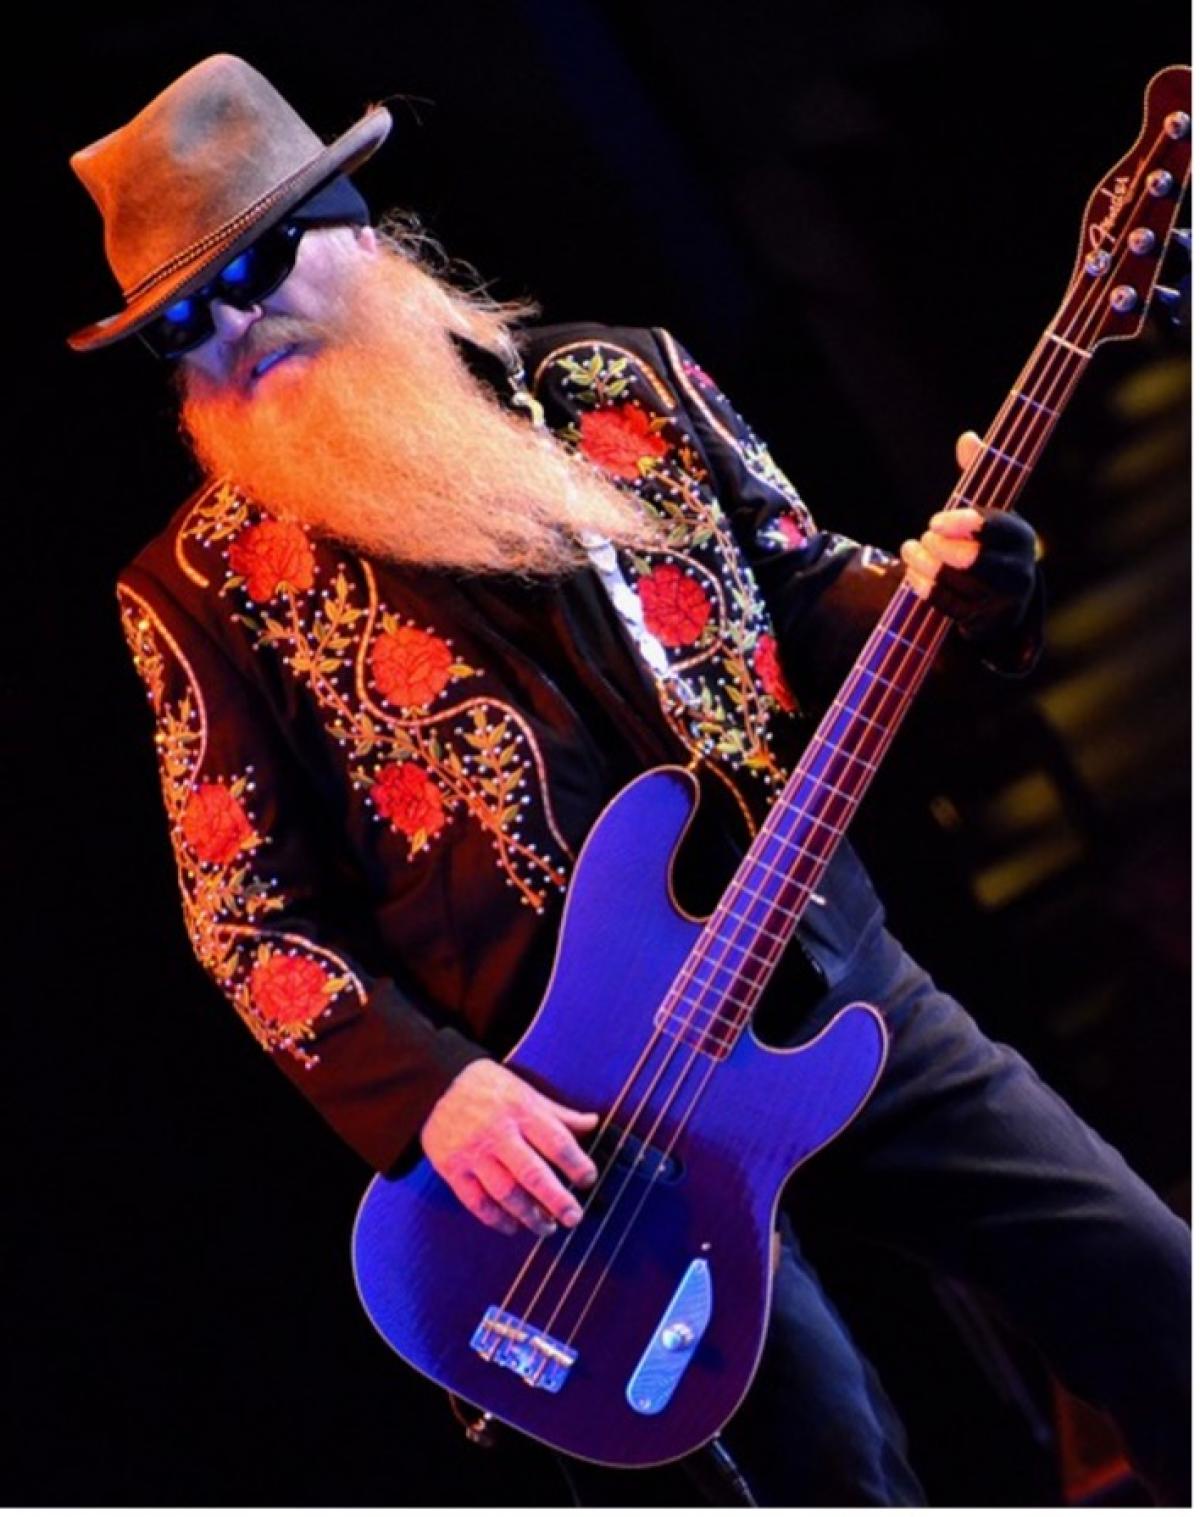 dusty ZZ Top concert cancelled